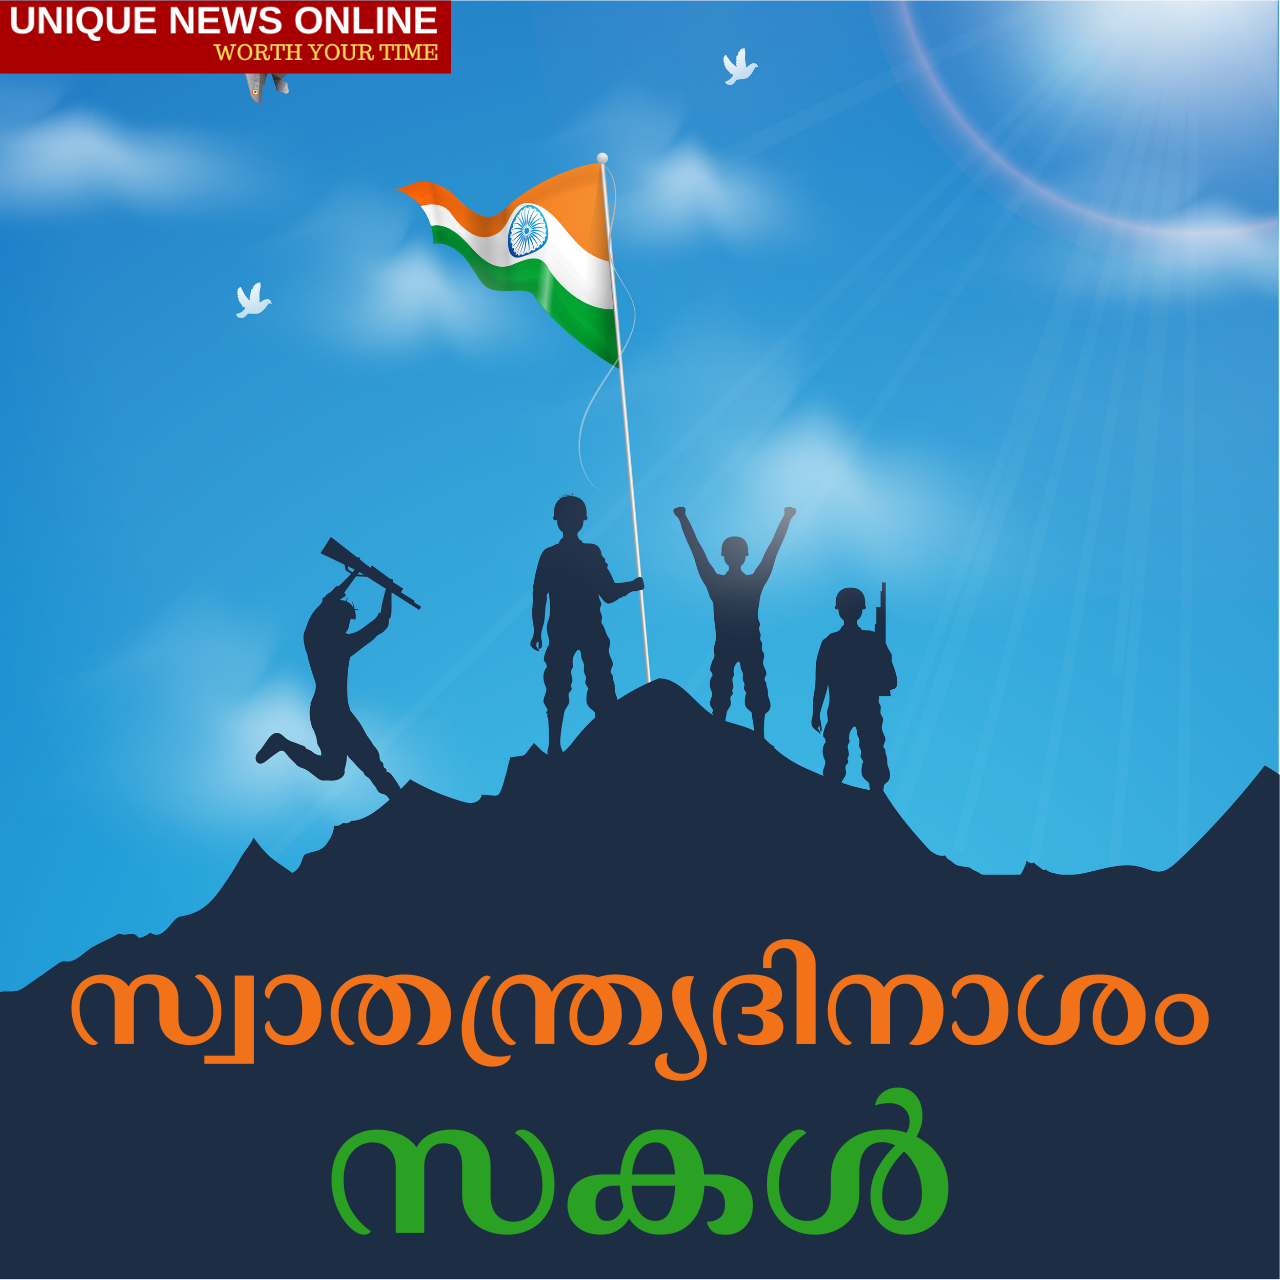 Independence Day 2021 Tamil and Malayalam Greetings, Messages, Wishes, HD Images, Status, Slogans, Quotes, and DP for WhatsApp